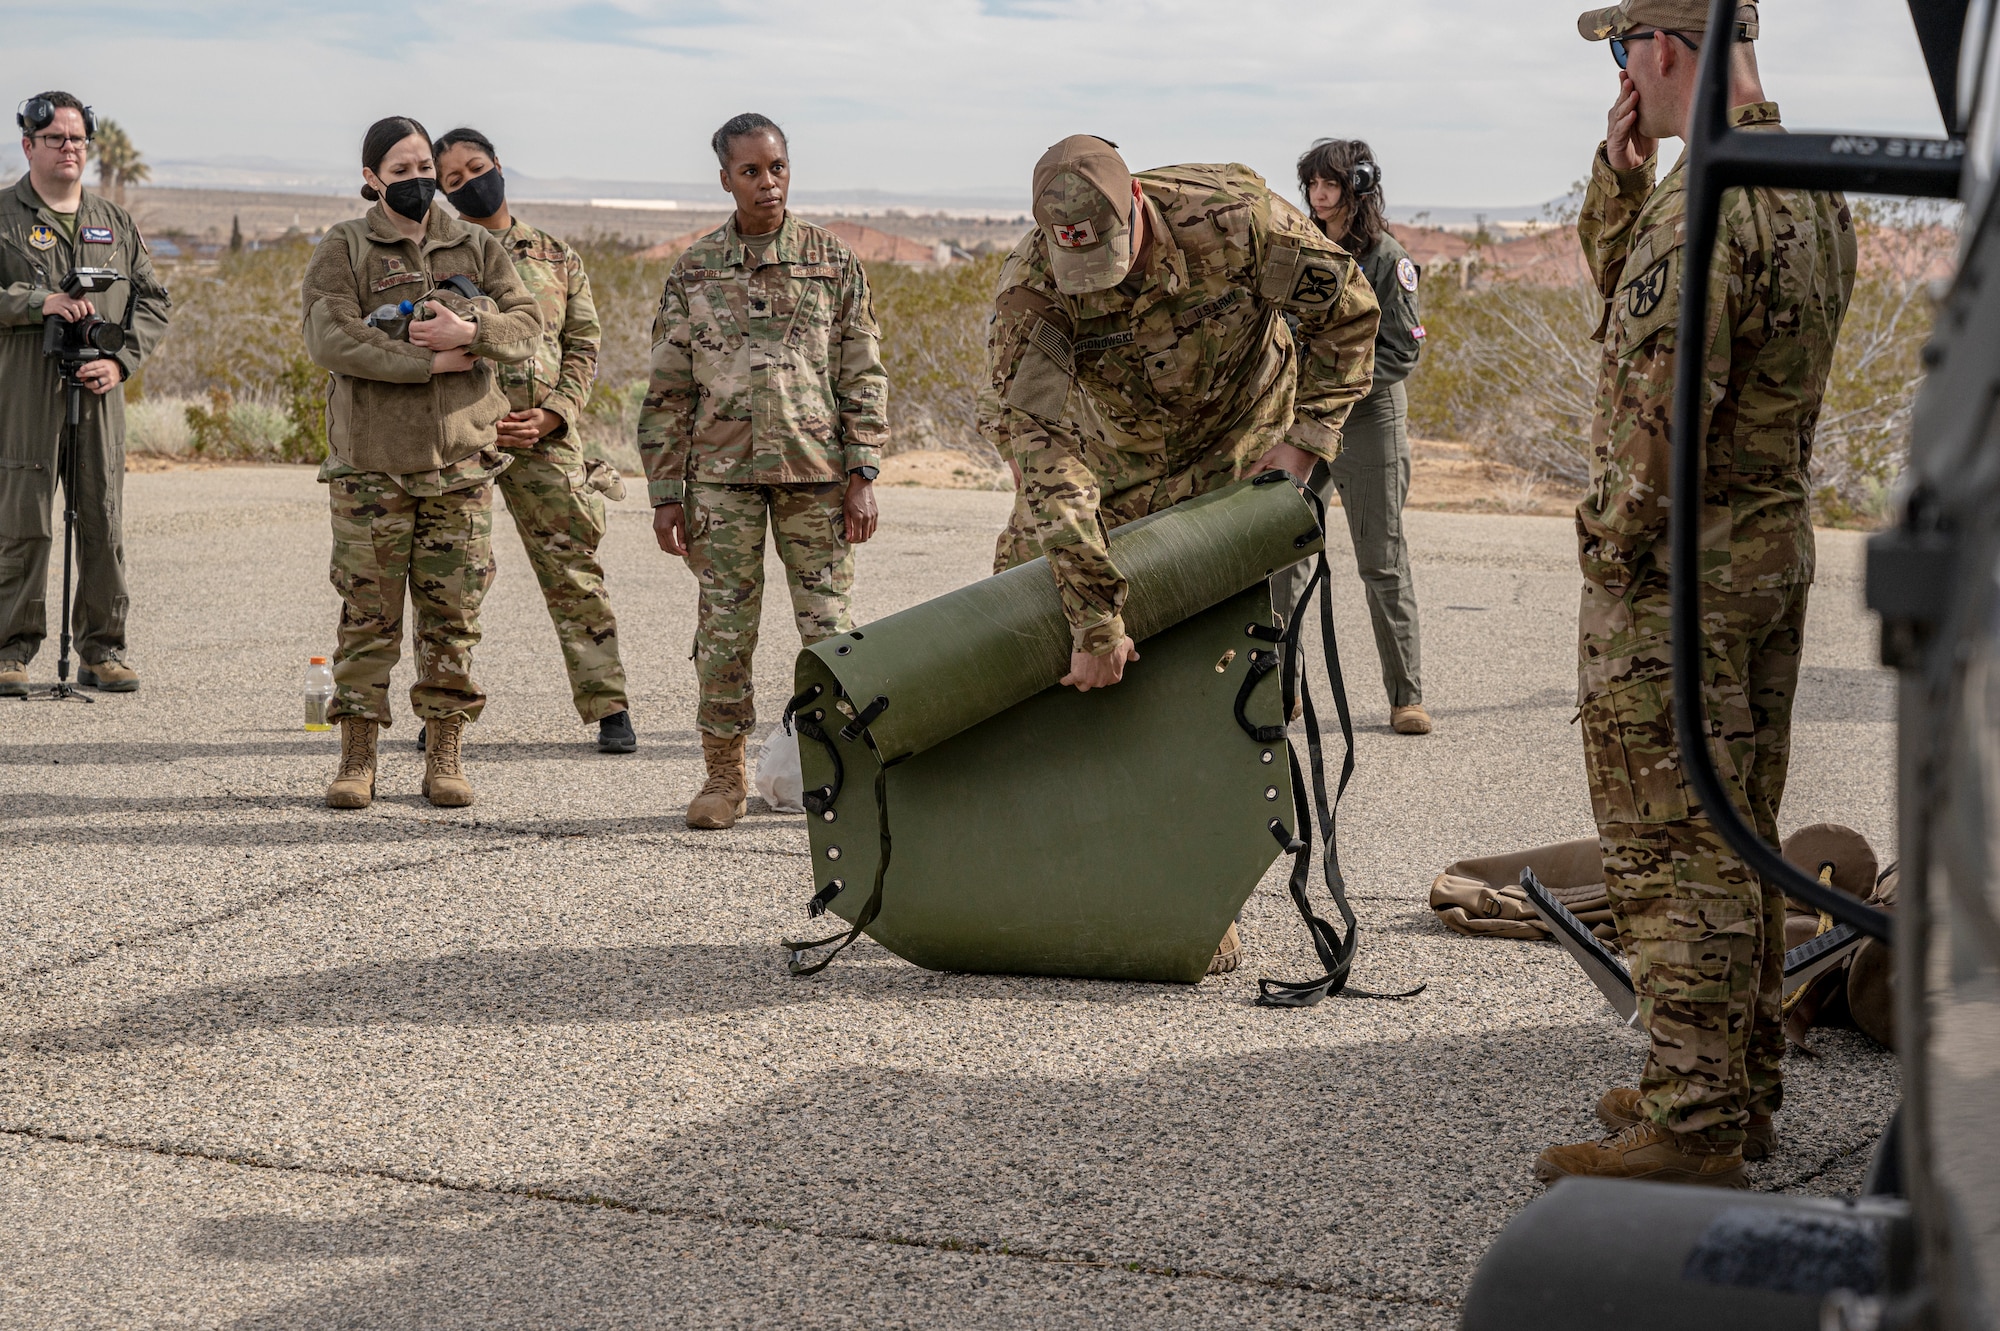 Soldiers from C Company, 2916th Aviation Battalion, 916th Support Brigade and Airmen from the 412th Medical Group, conduct medevac training at Edwards Air Force Base, California, March 3. (Air Force photo by Katherine Franco)